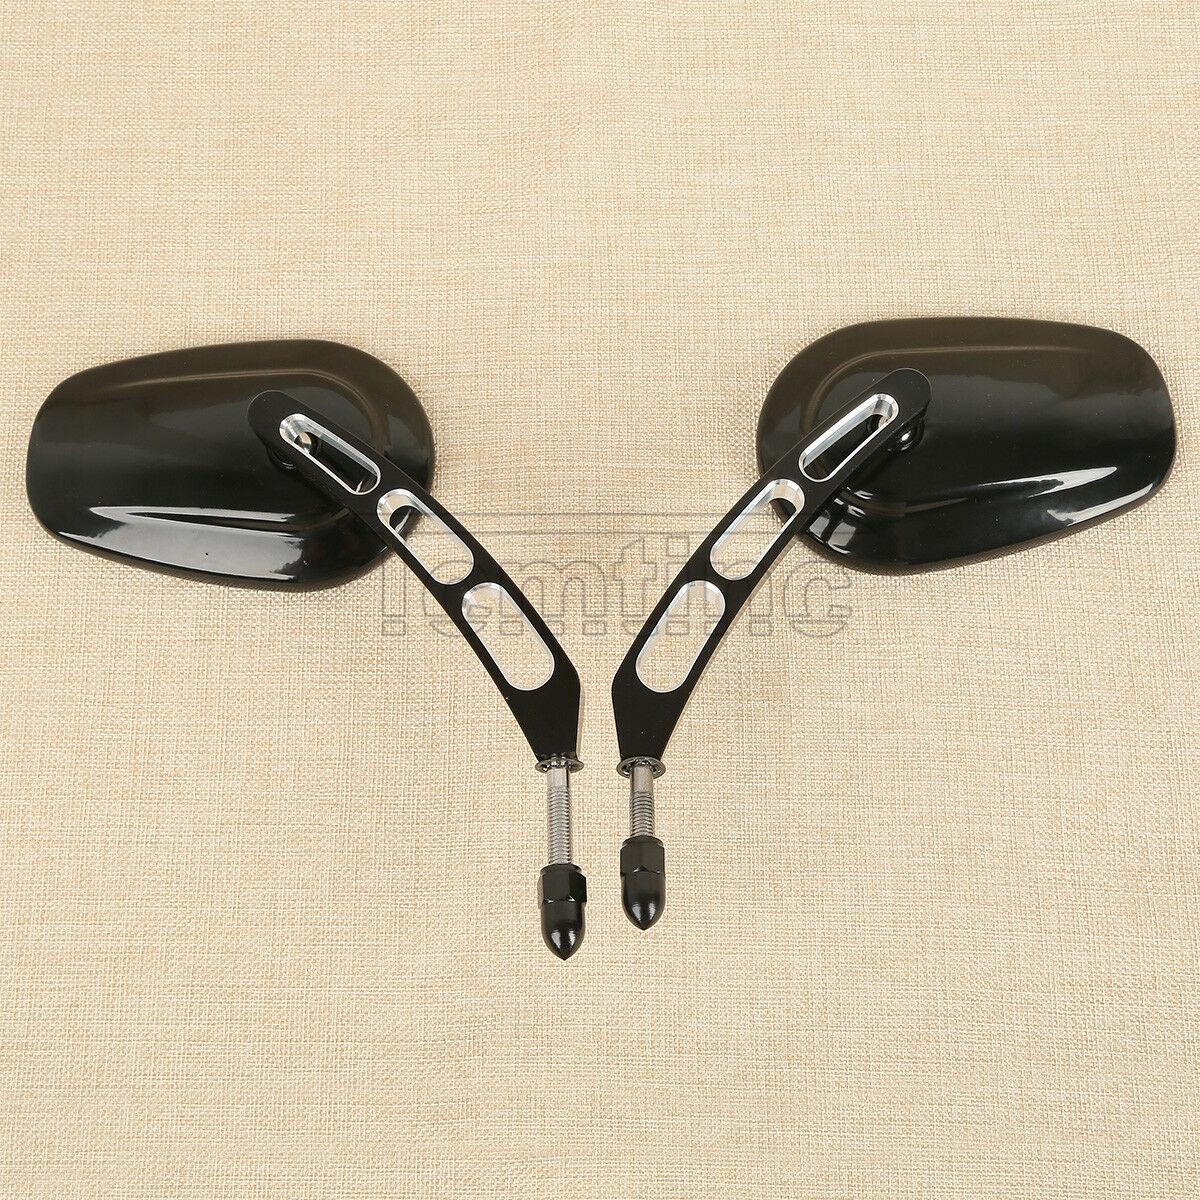 Black L & R Rearview Mirrors For Harley Street 500 750 XG500 XG750 Sportster XL - Moto Life Products